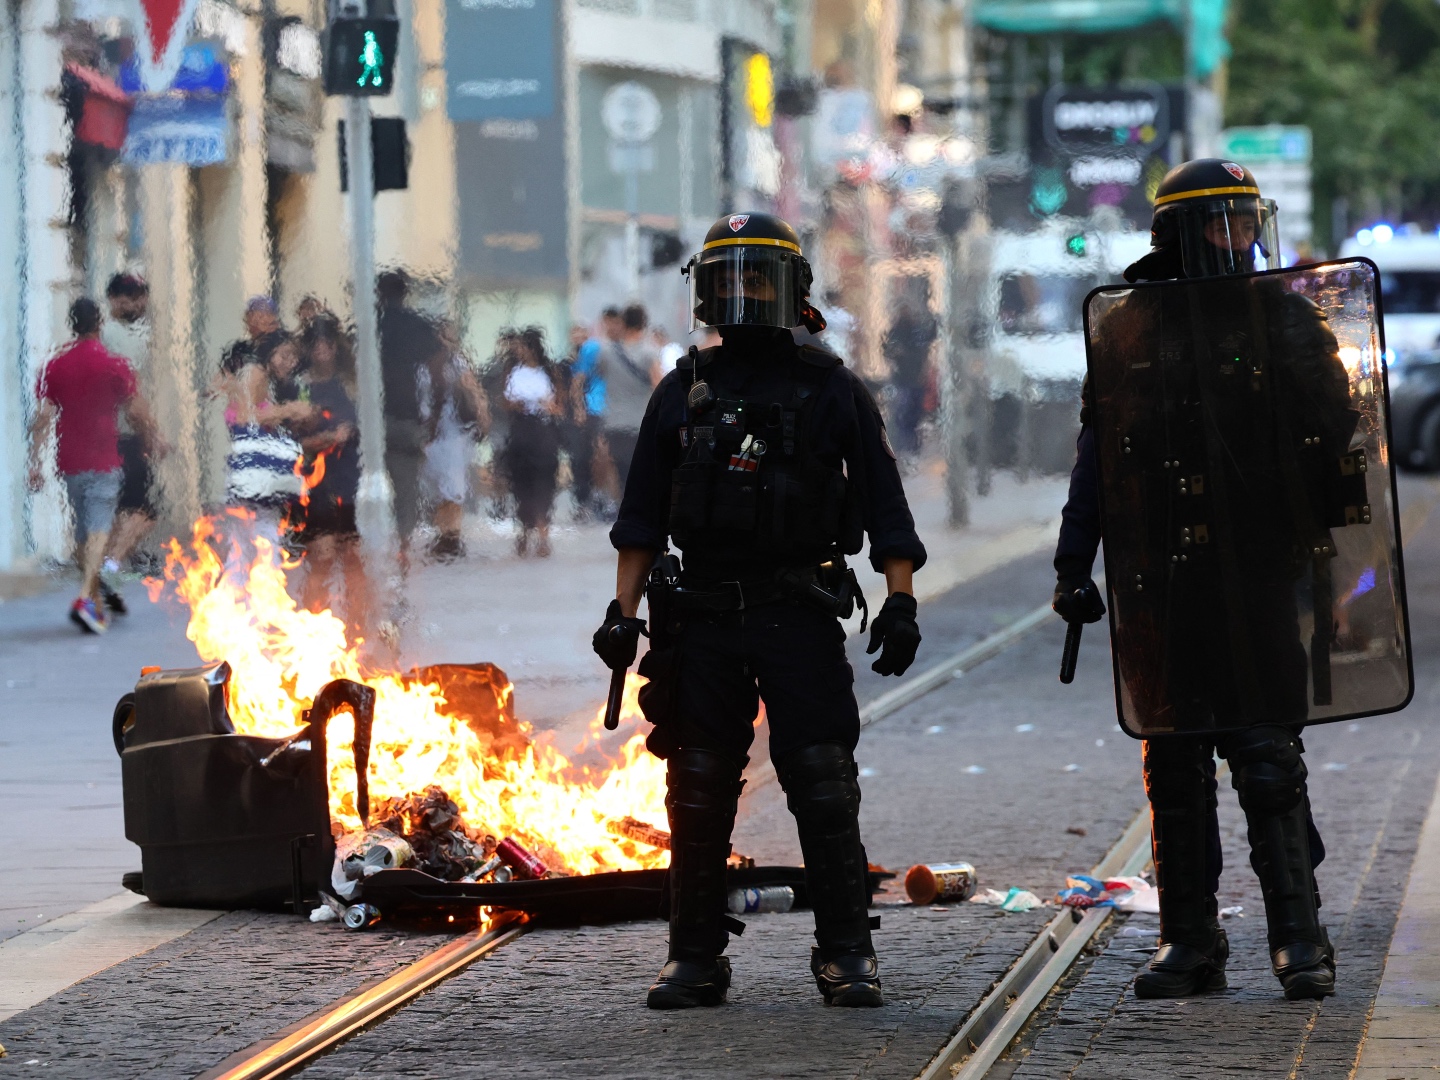 TOPSHOT - French riot police officers stand guard next to a burnt out trash bin during a demonstration against police in Marseille, southern France on July 1, 2023, after a fourth consecutive night of rioting in France over the killing of a teenager by police. French police arrested 1311 people nationwide during a fourth consecutive night of rioting over the killing of a teenager by police, the interior ministry said on July 1, 2023. France had deployed 45,000 officers overnight backed by light armoured vehicles and crack police units to quell the violence over the death of 17-year-old Nahel, killed during a traffic stop in a Paris suburb on June 27, 2023. (Photo by CLEMENT MAHOUDEAU / AFP) (Photo by CLEMENT MAHOUDEAU/AFP via Getty Images)